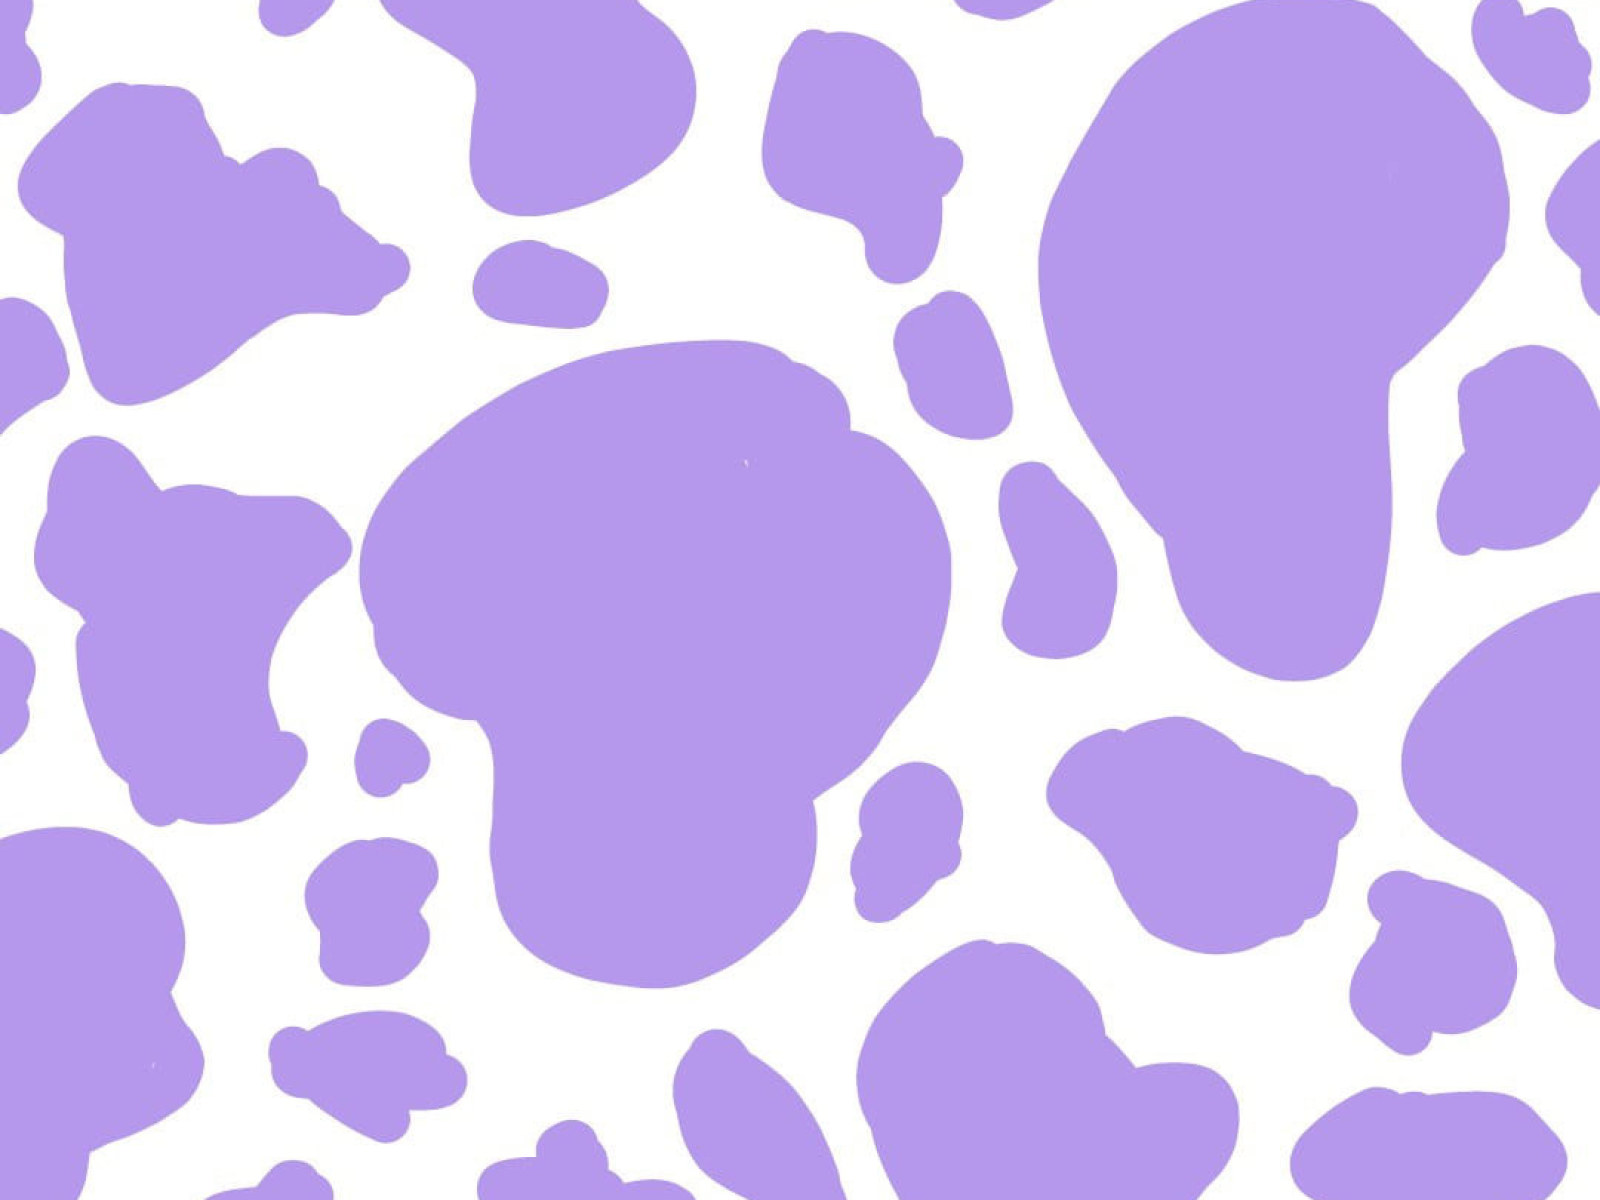 Cow Print Aesthetic Wallpapers - Wallpaper Cave